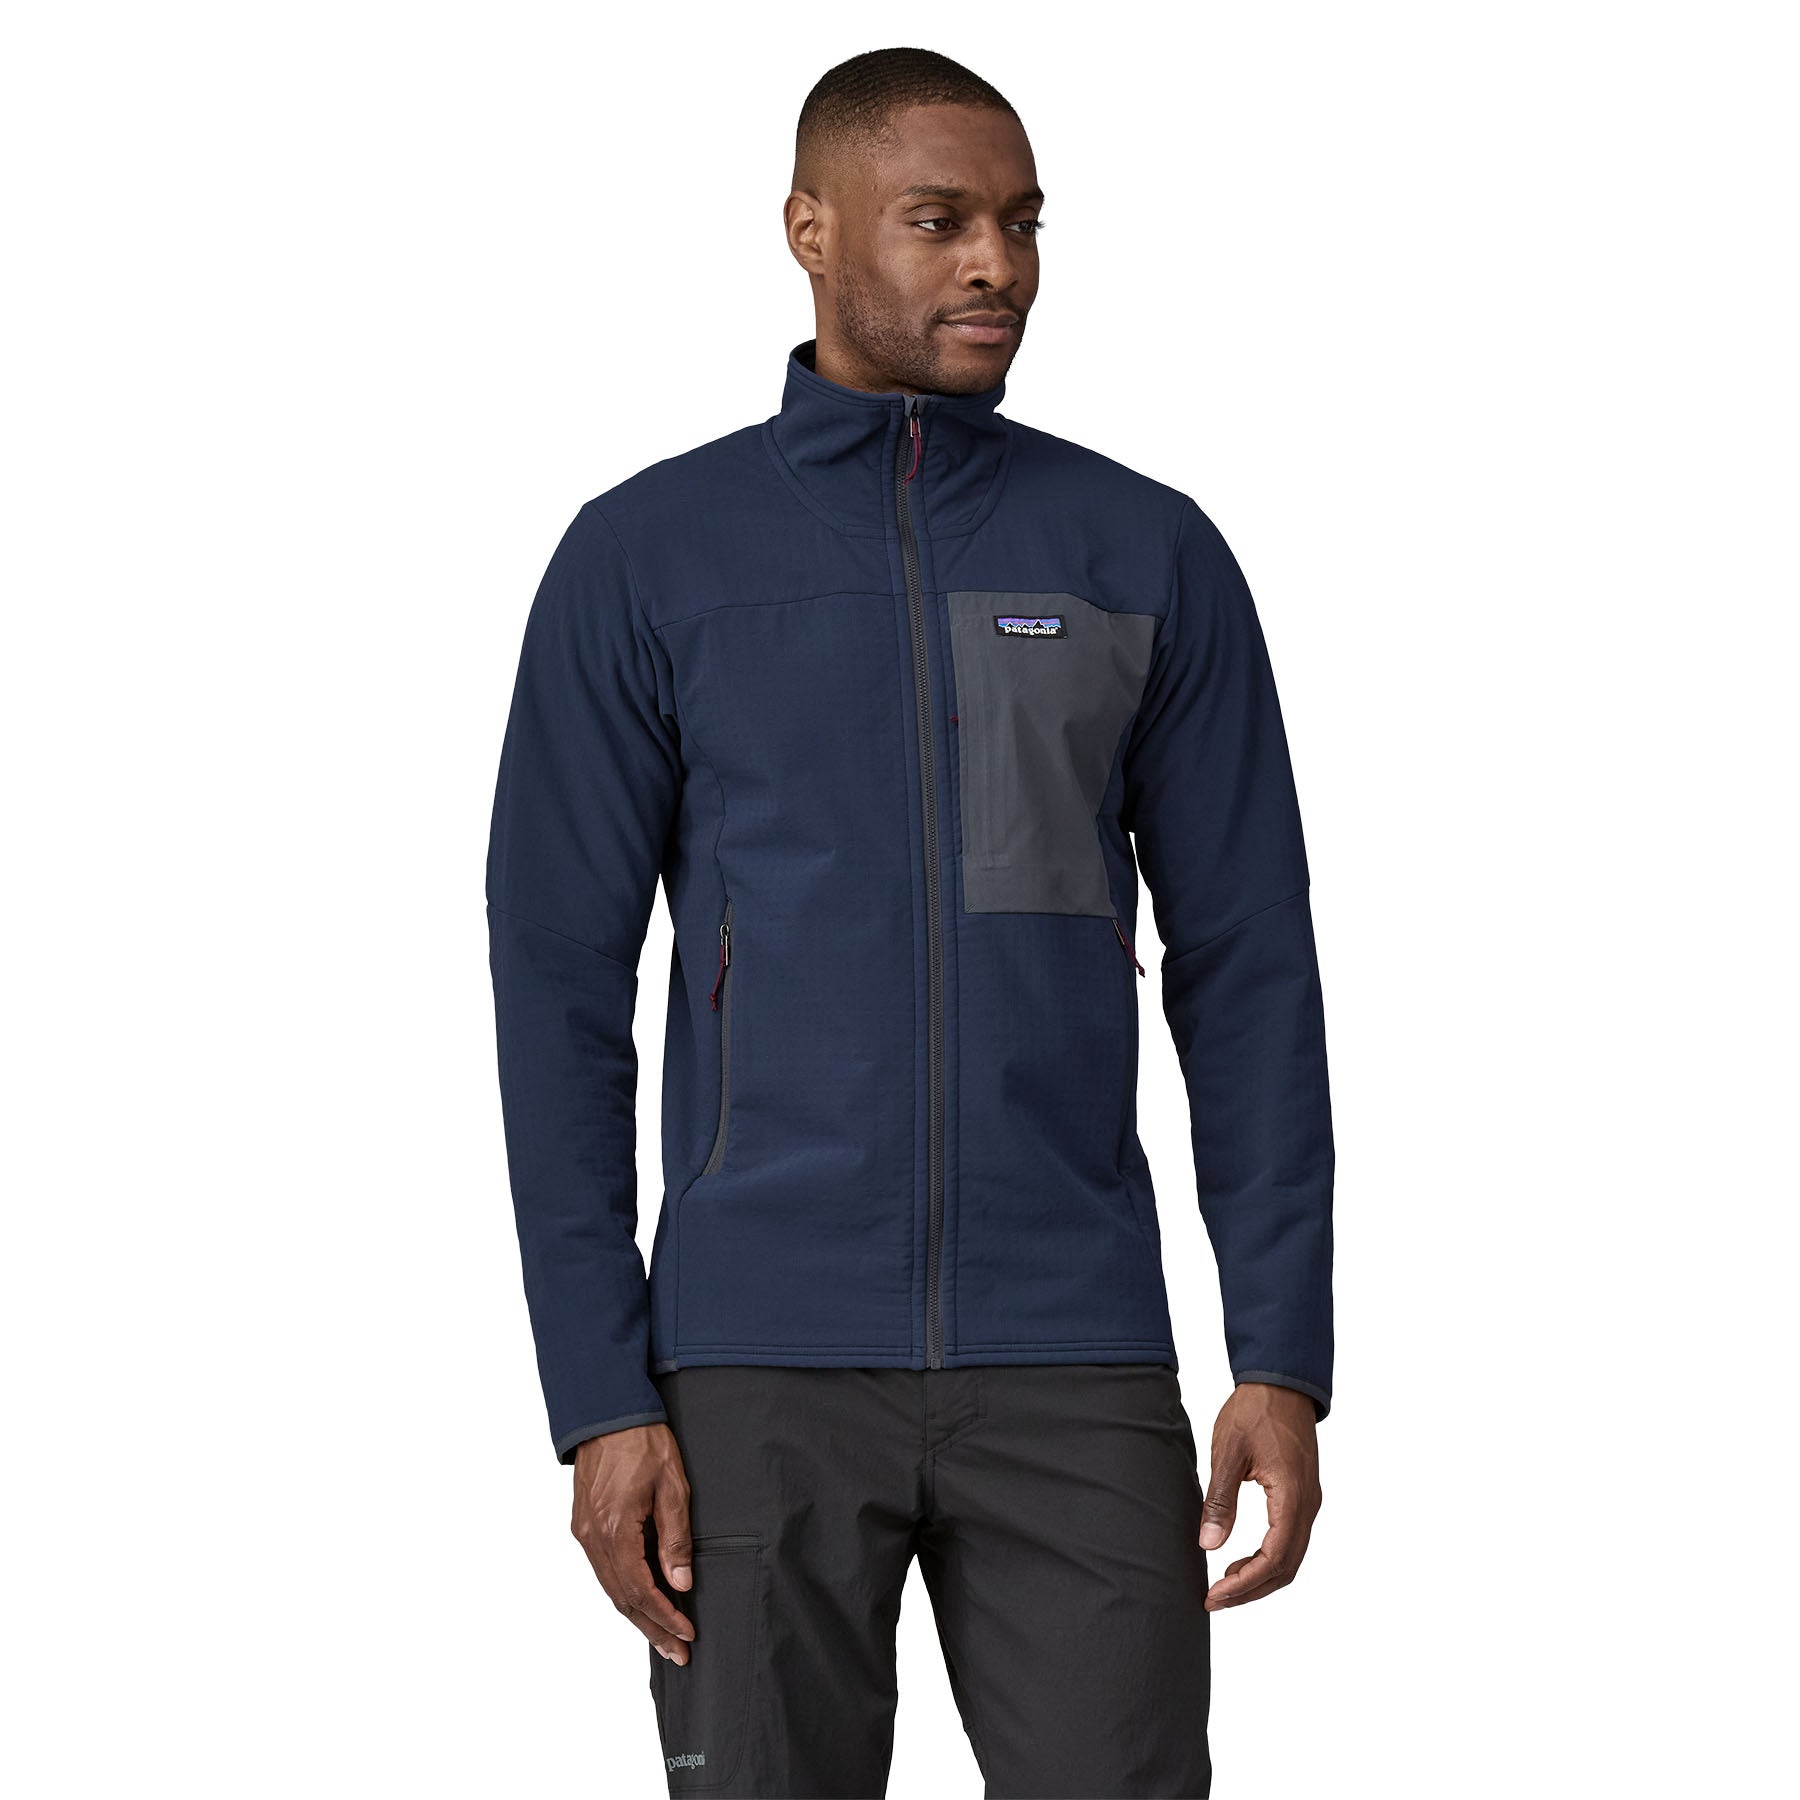 Men's Technical Fleece Jackets & Vests by Patagonia